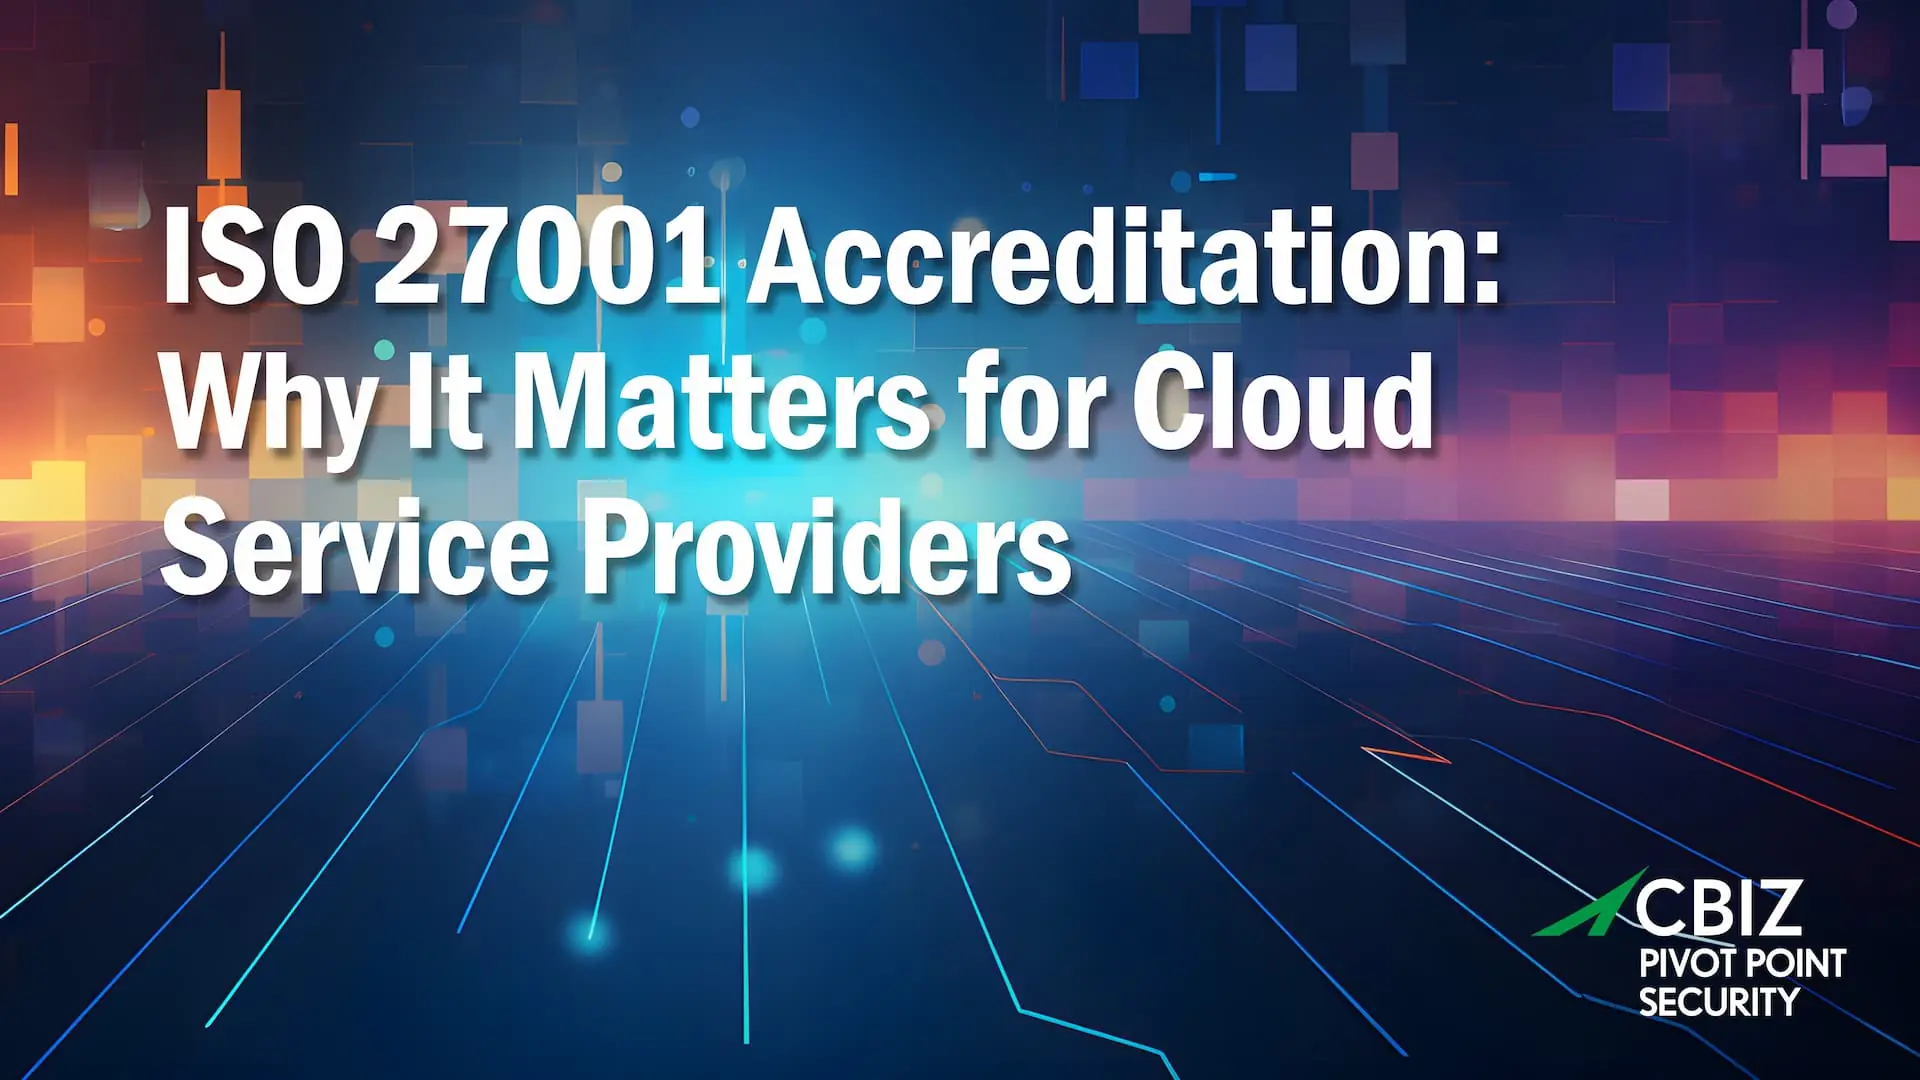 ISO 27001 Accreditation: Why It Matters for Cloud Service Providers